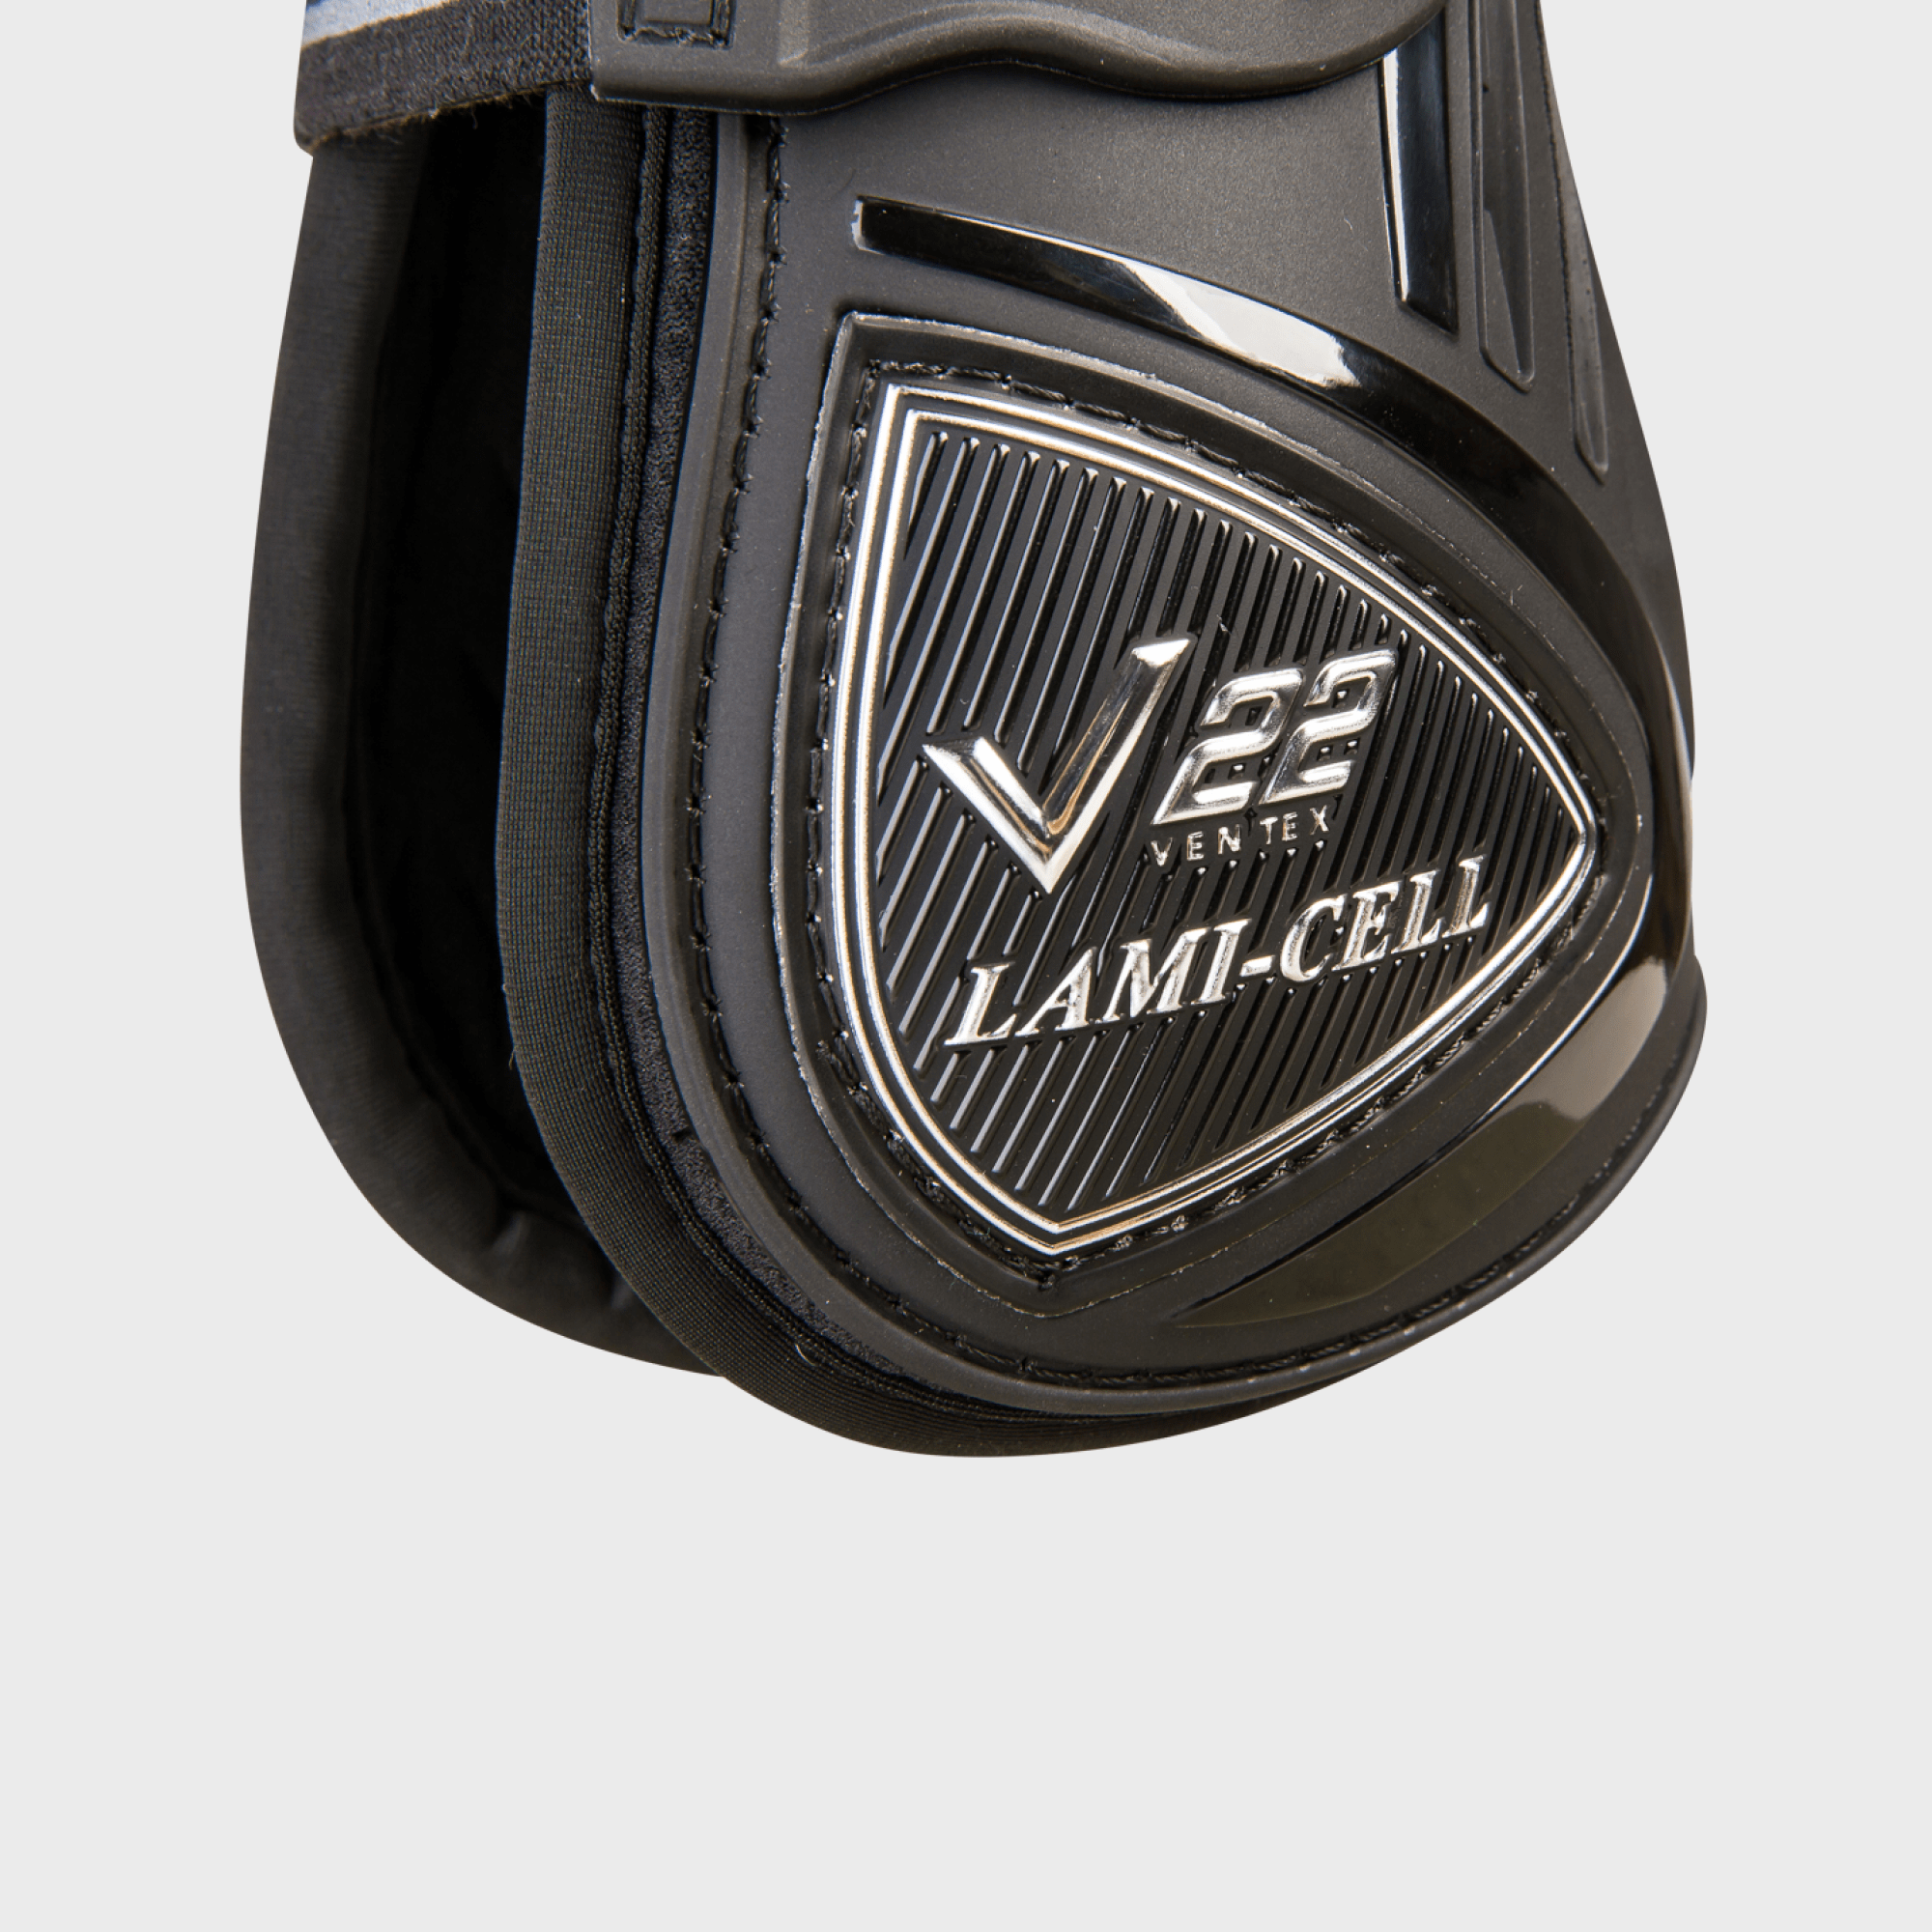 V22 Tendon Boots with Knee Protection